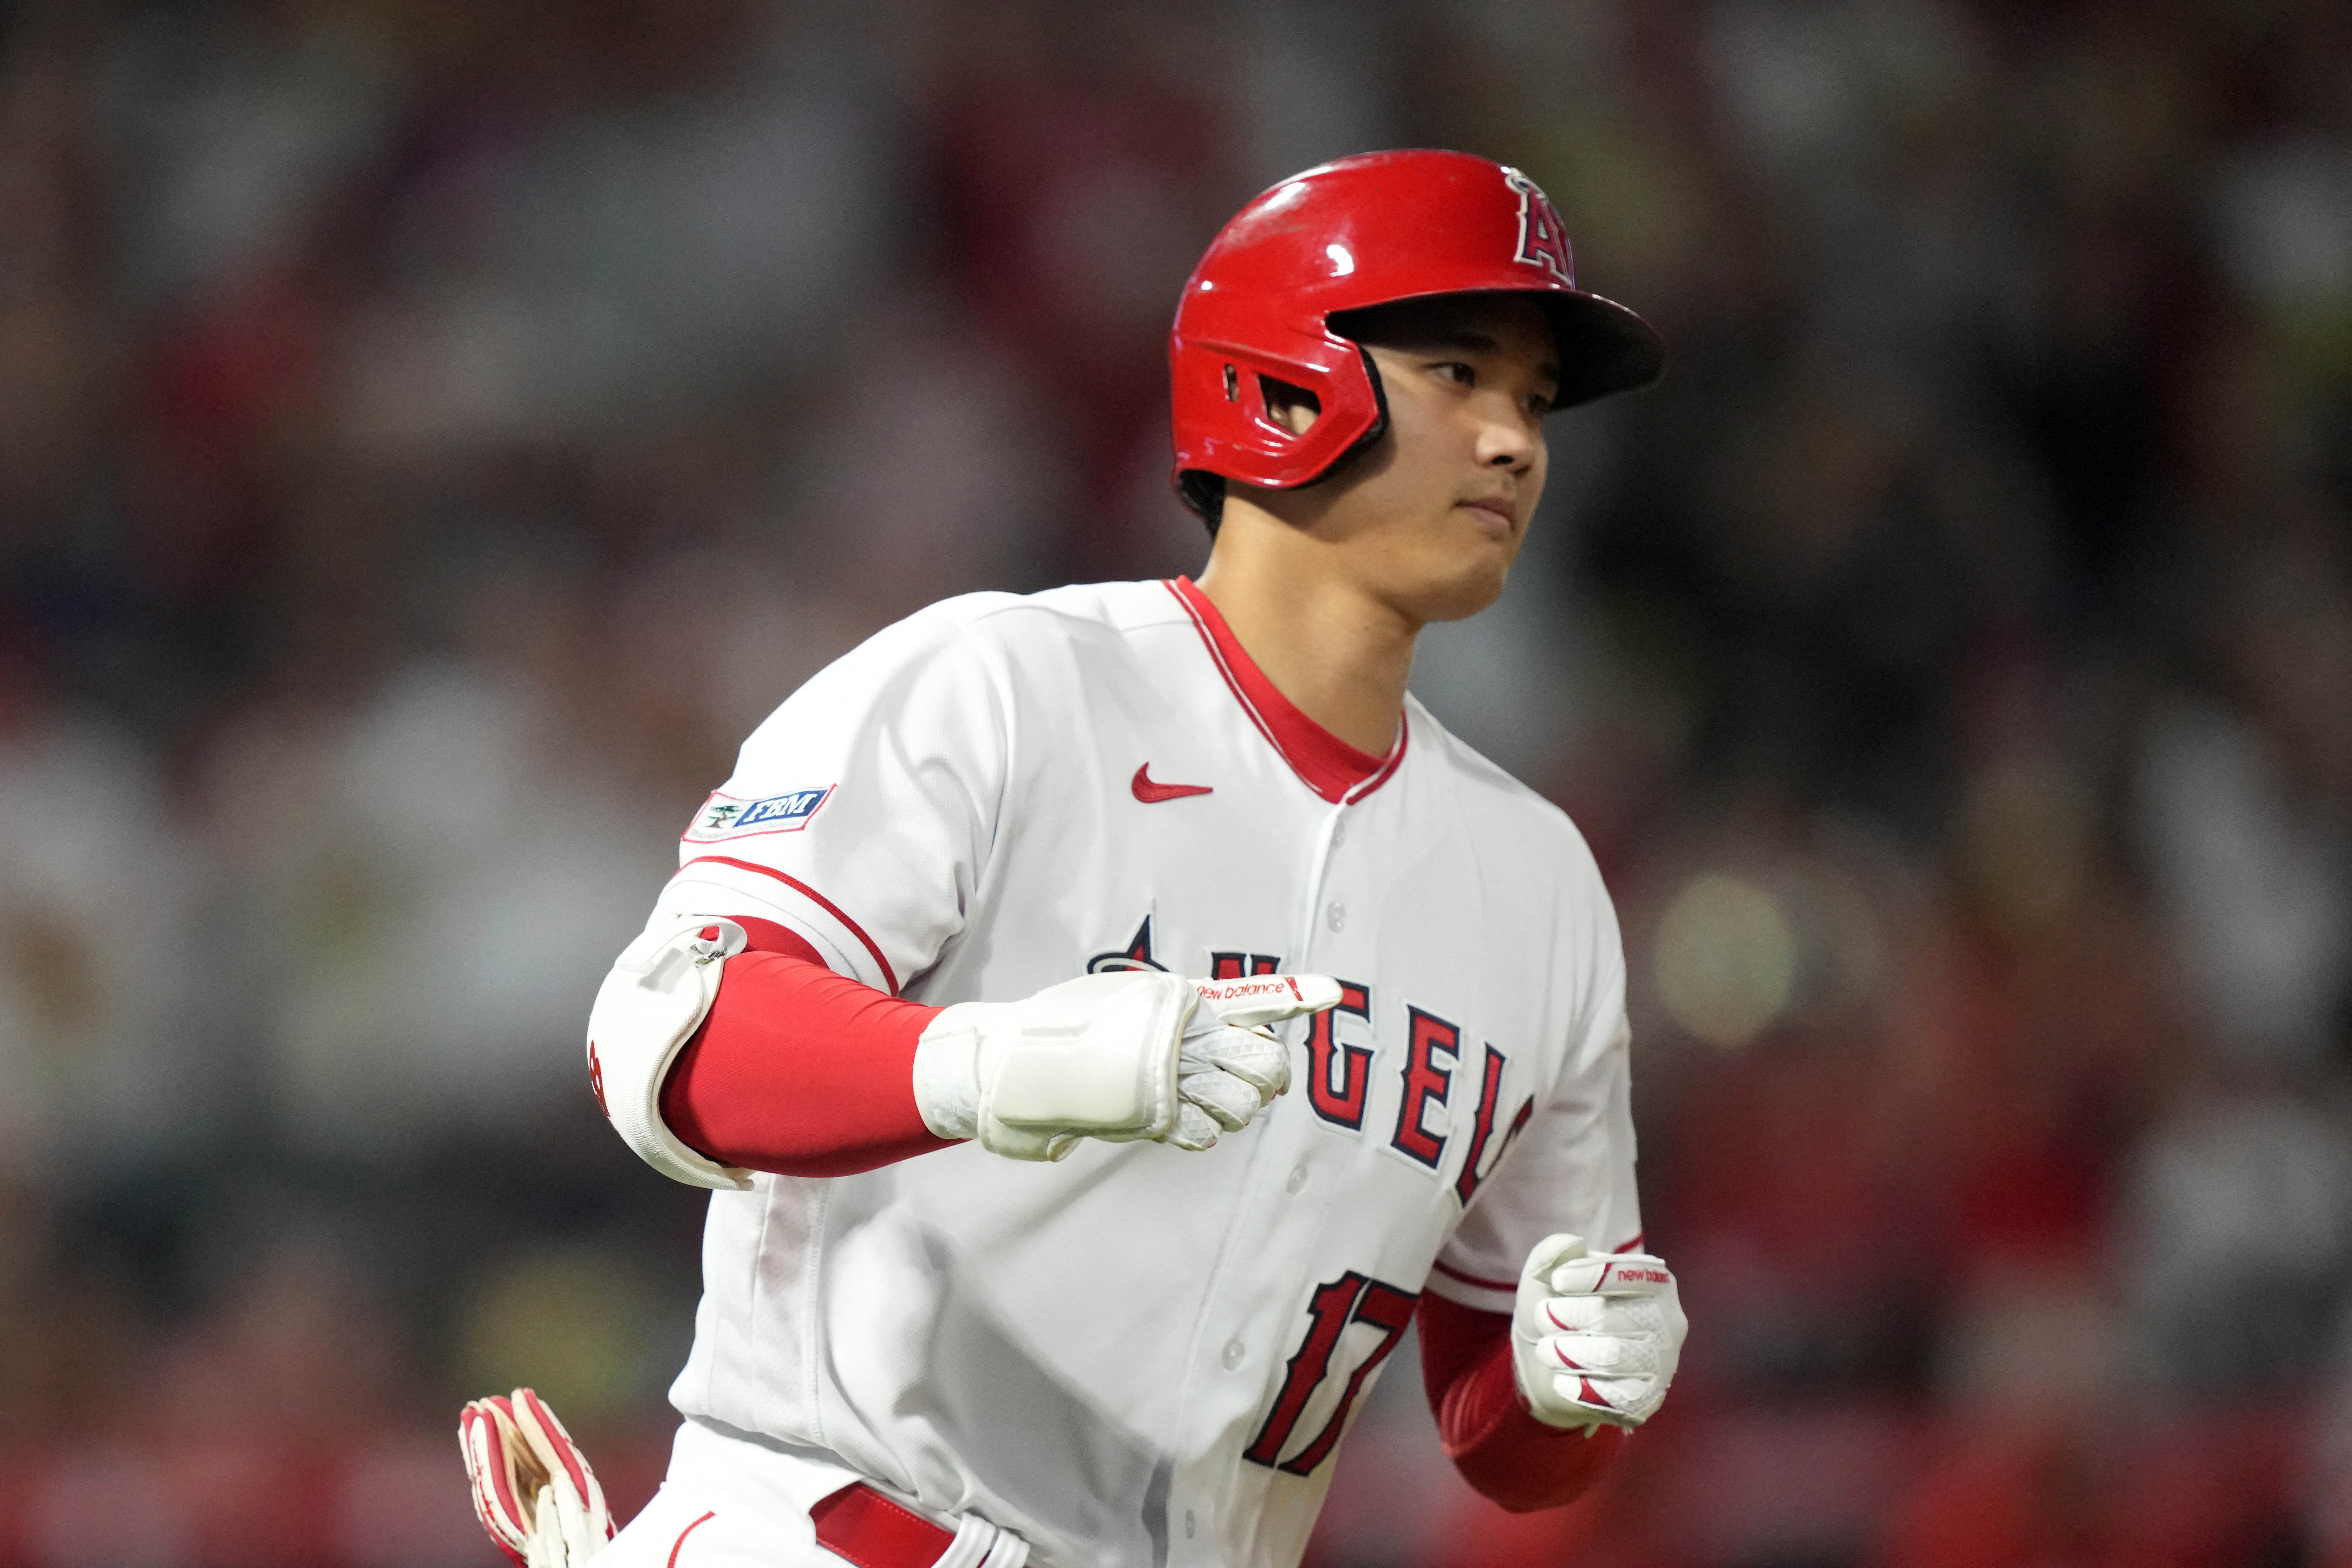 MLB on X: For the second year in a row, Shohei Ohtani is MLB